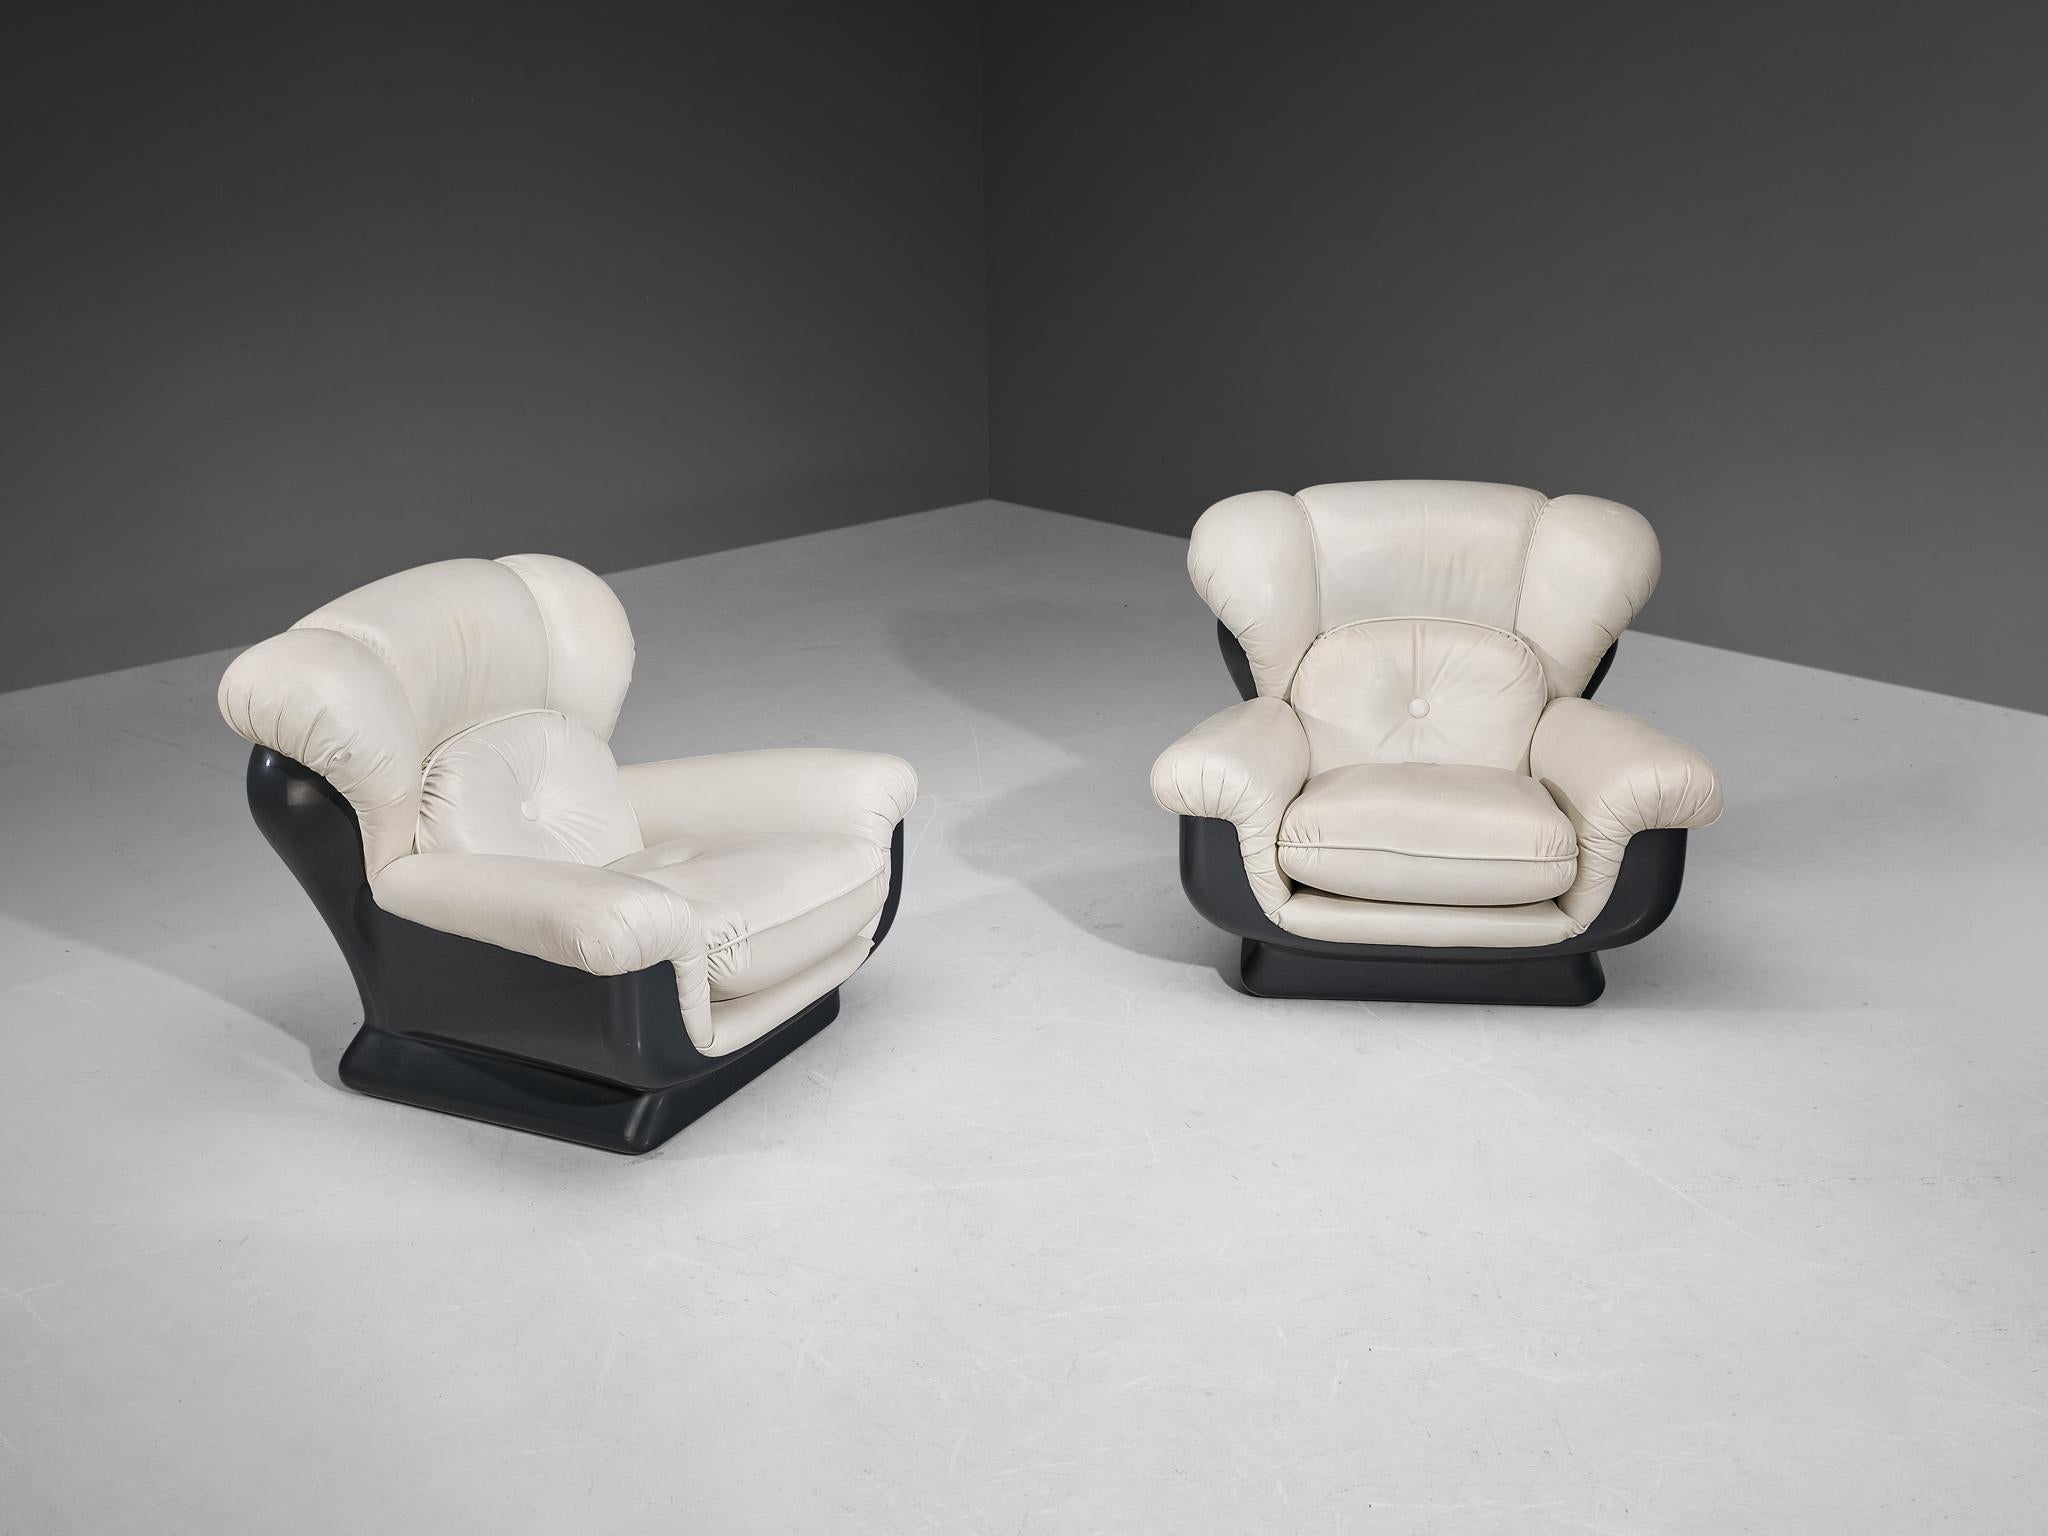 Late 20th Century Italian Bulky Pair of Lounge Chairs in Fiberglass and Leatherette For Sale